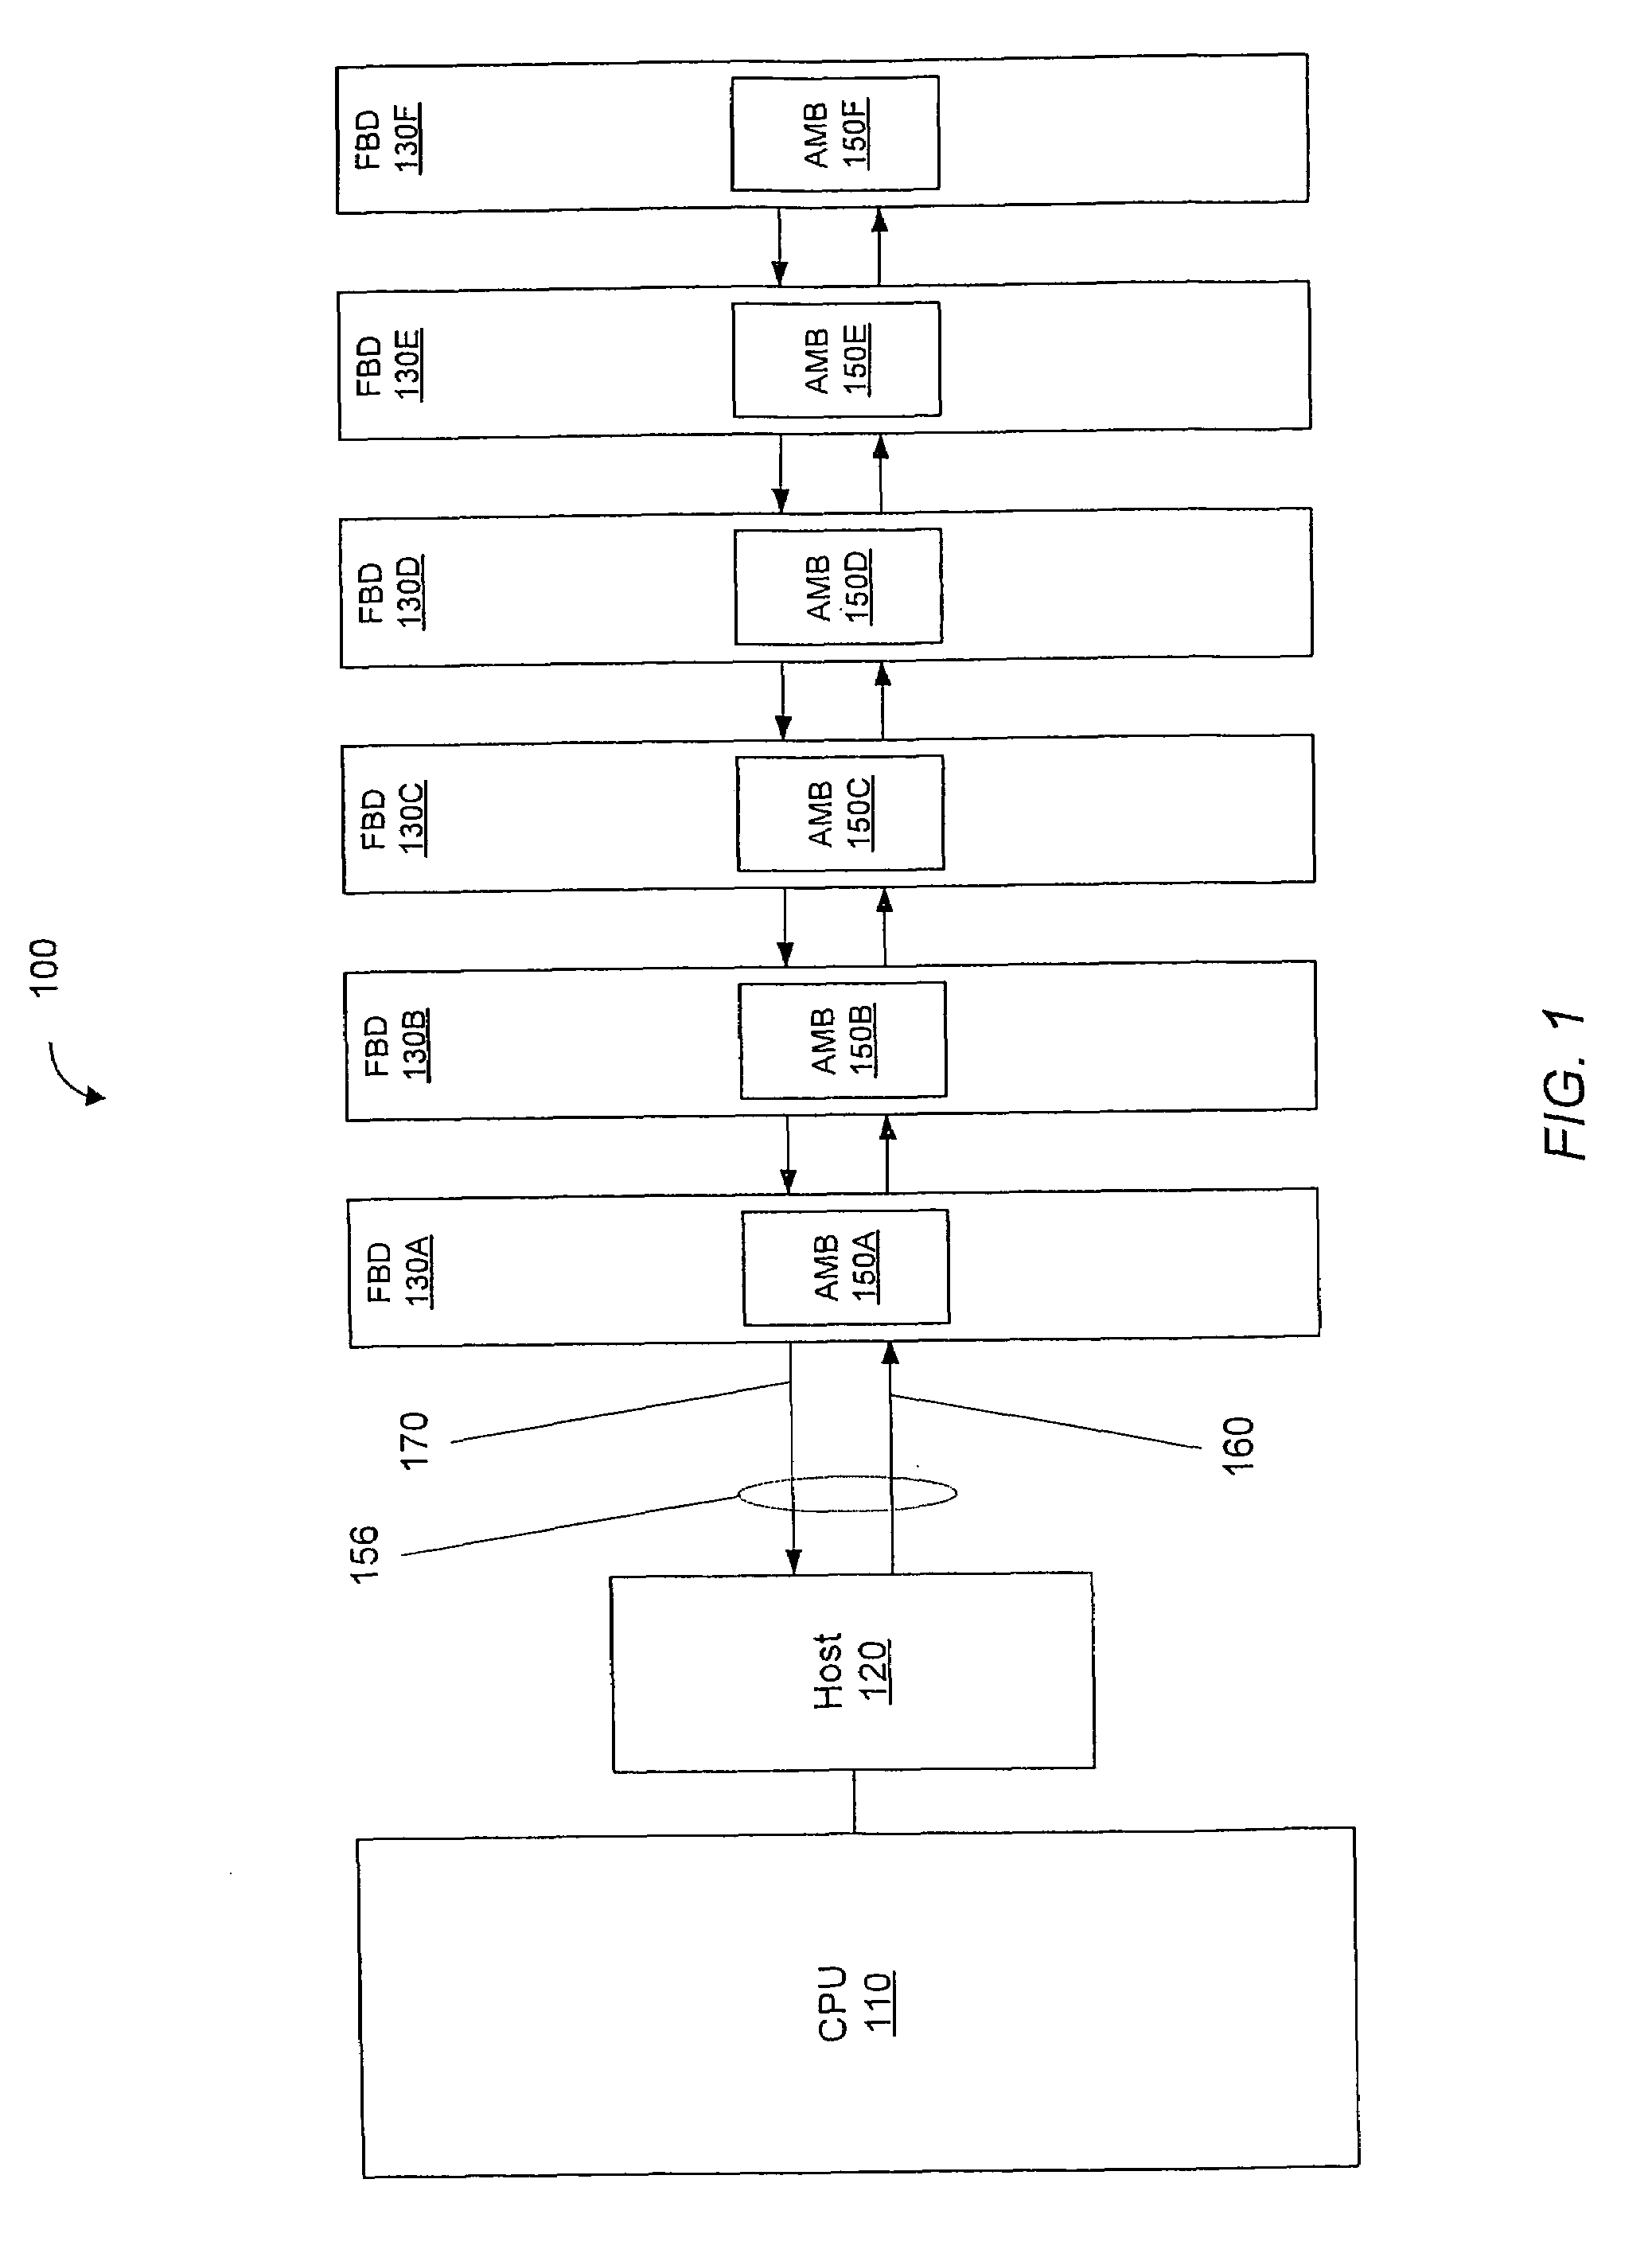 System memory board subsystem using DRAM with stacked dedicated high speed point to point links